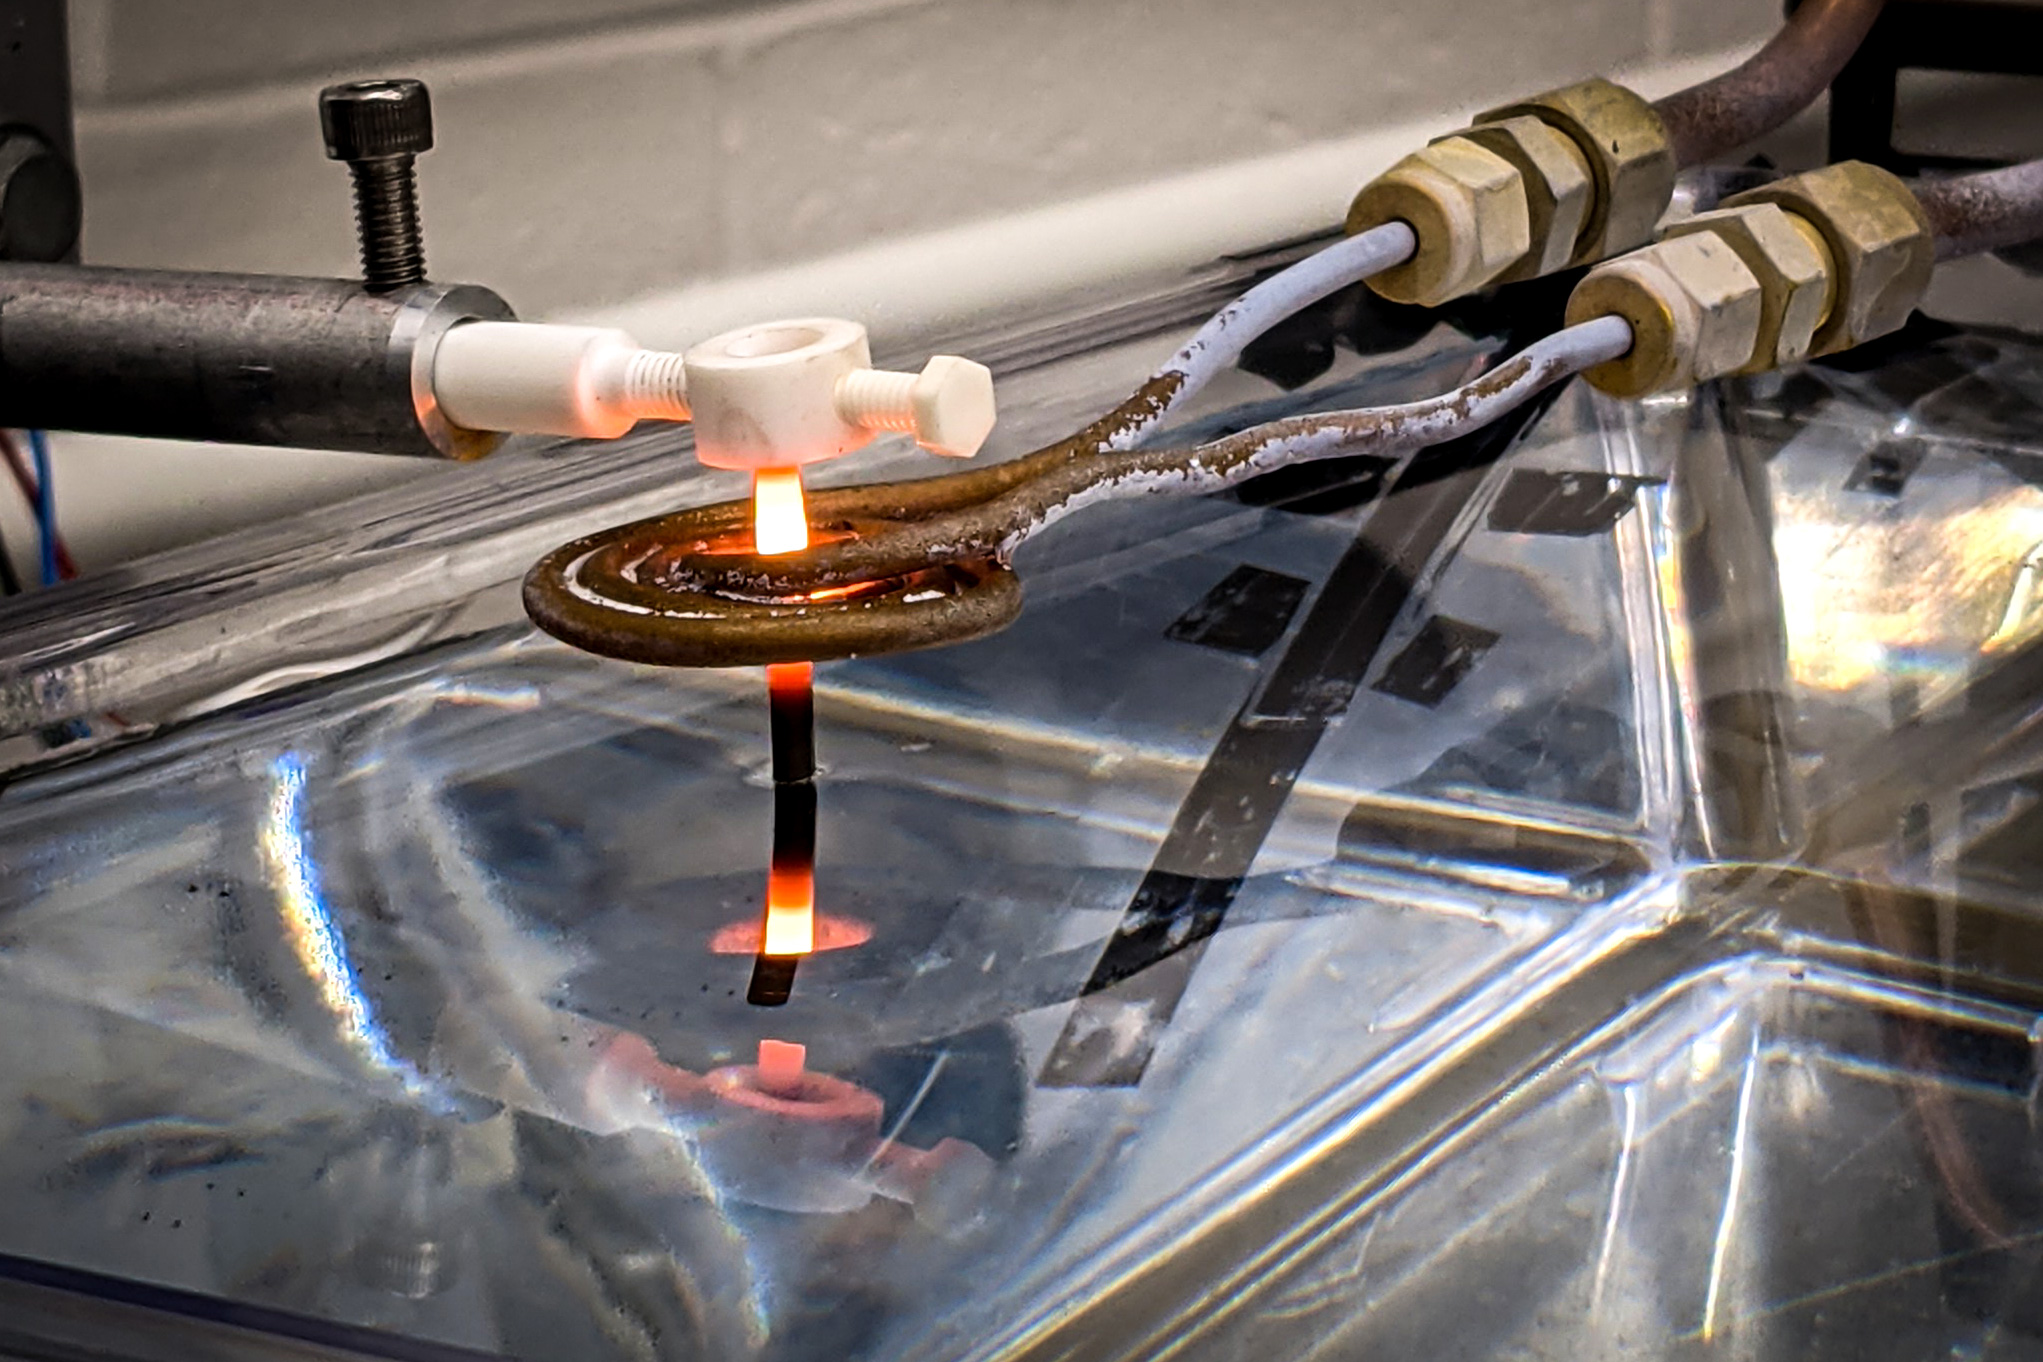 With new heat treatment, 3D-printed metals can withstand extreme conditions, MIT News